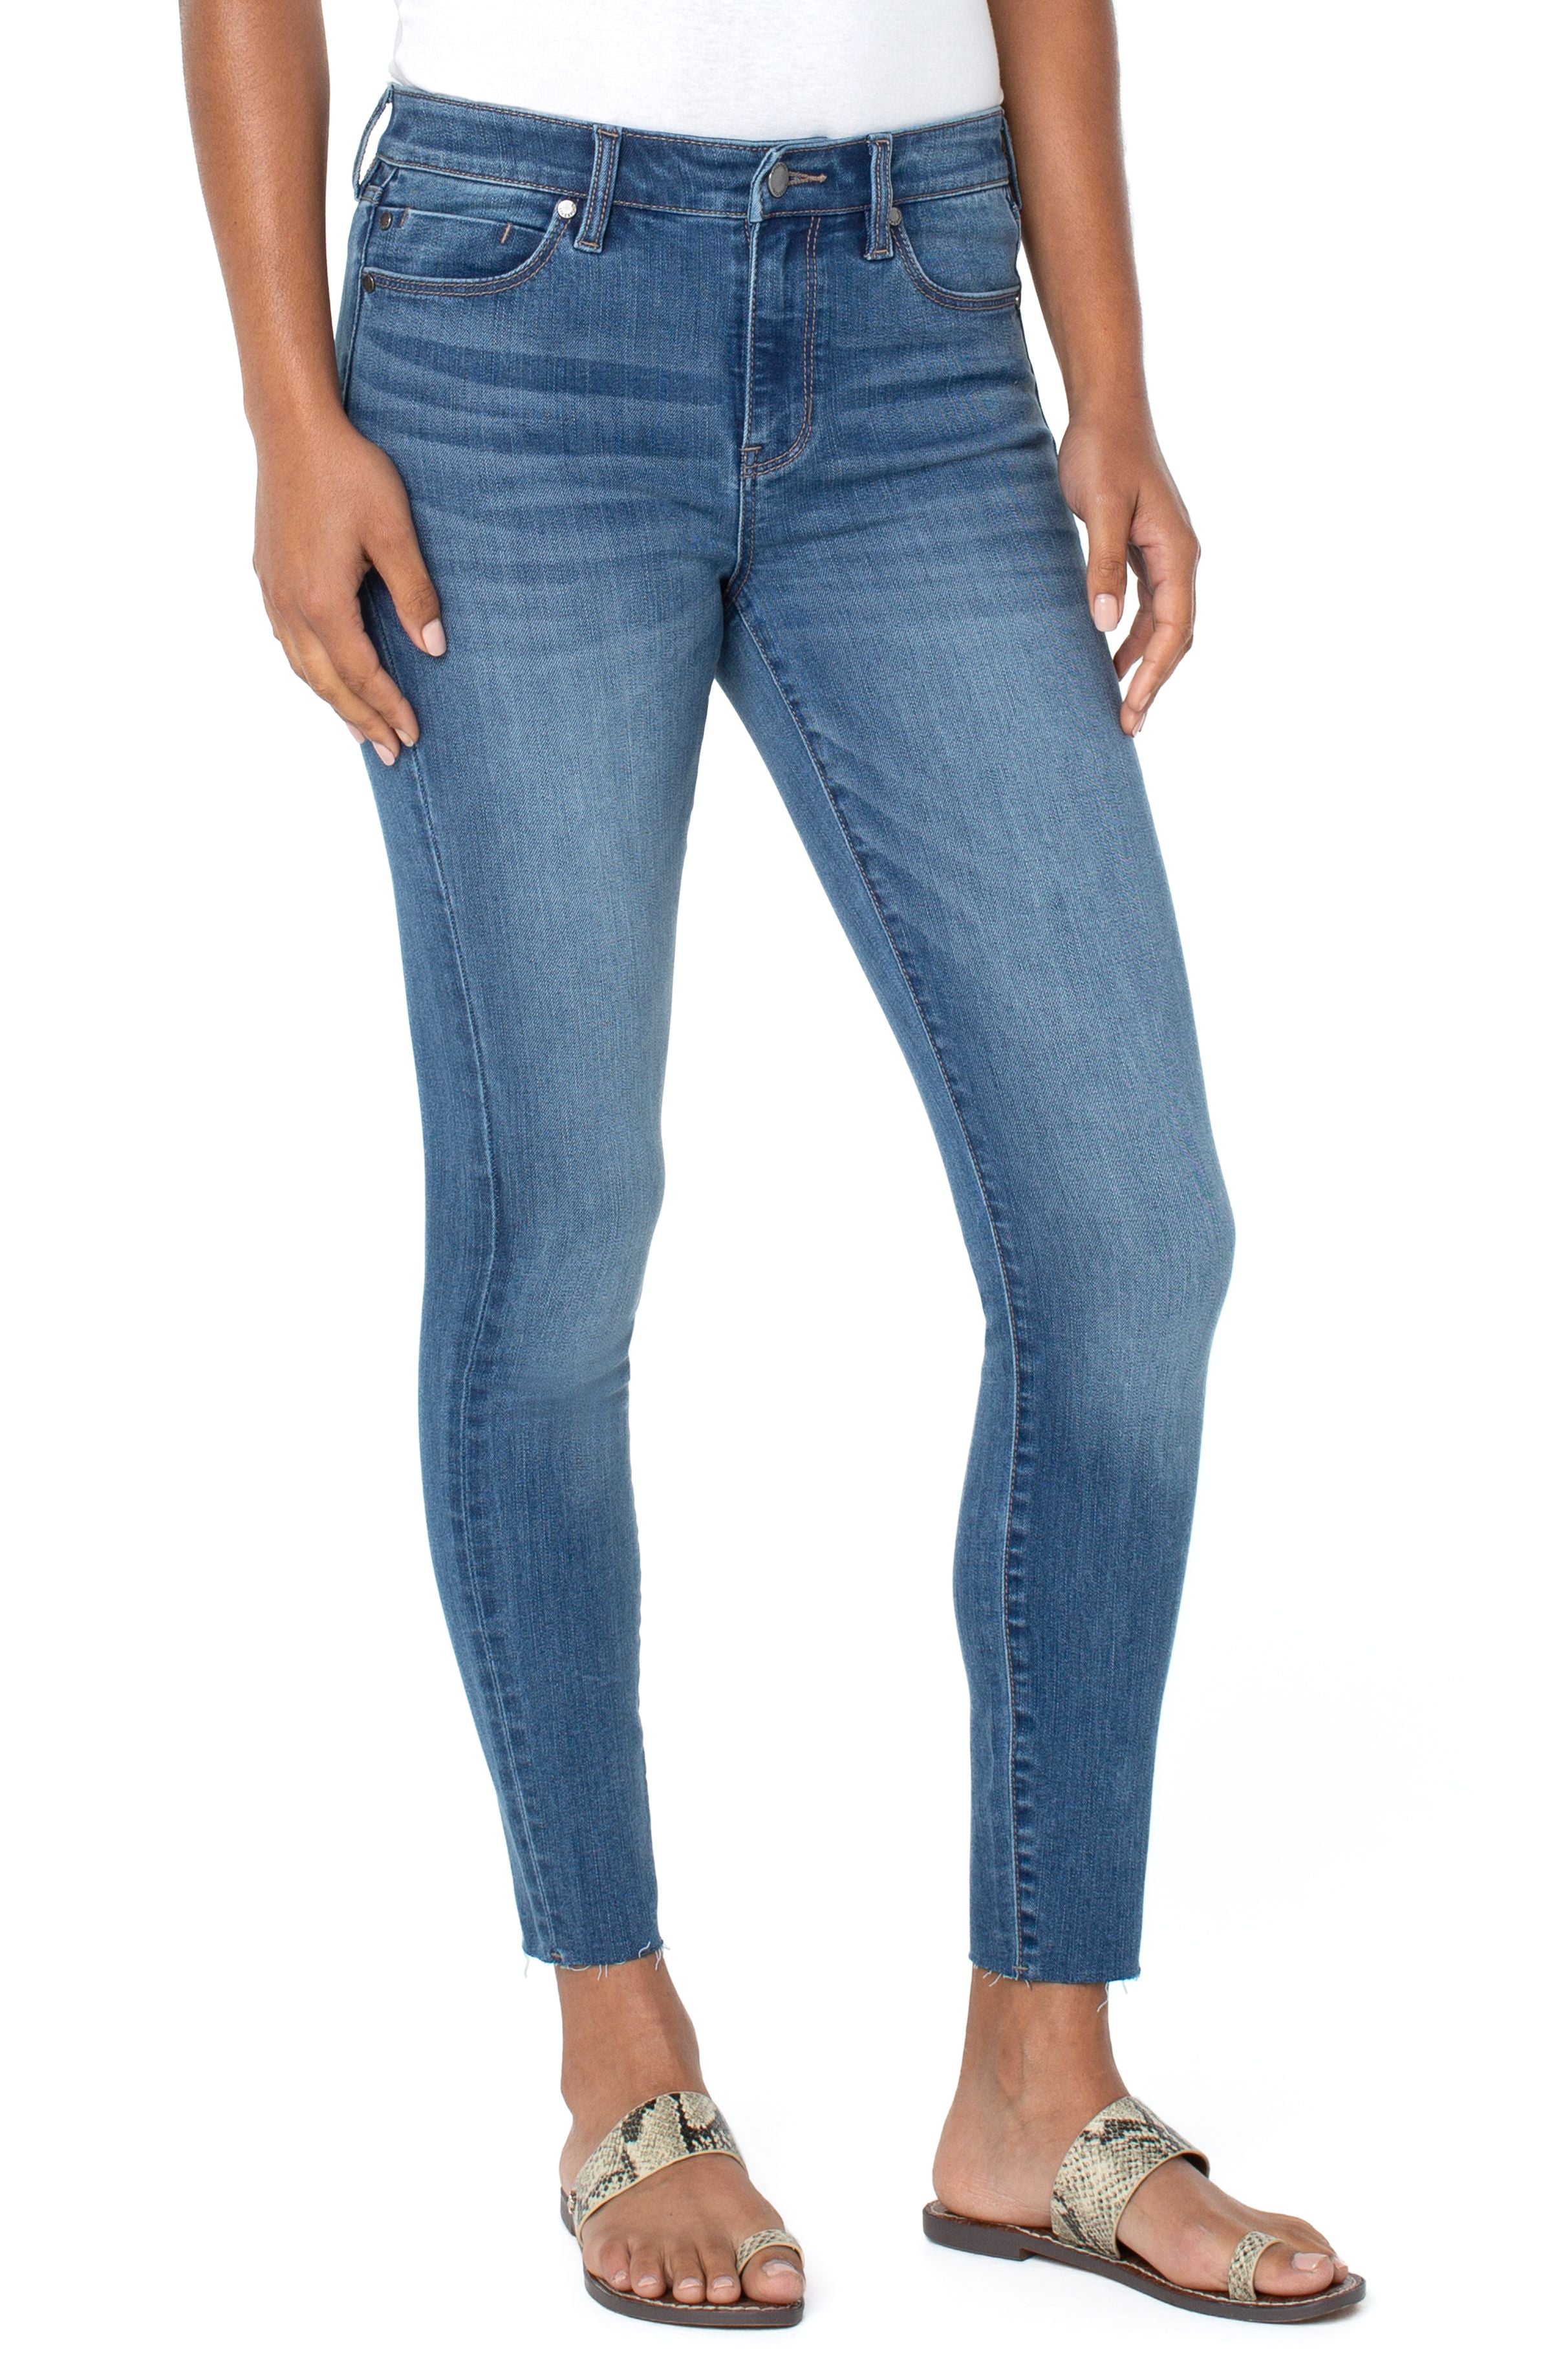 Liverpool ABBY SKINNY JEAN - ANKLE - ANNISTON BLUE